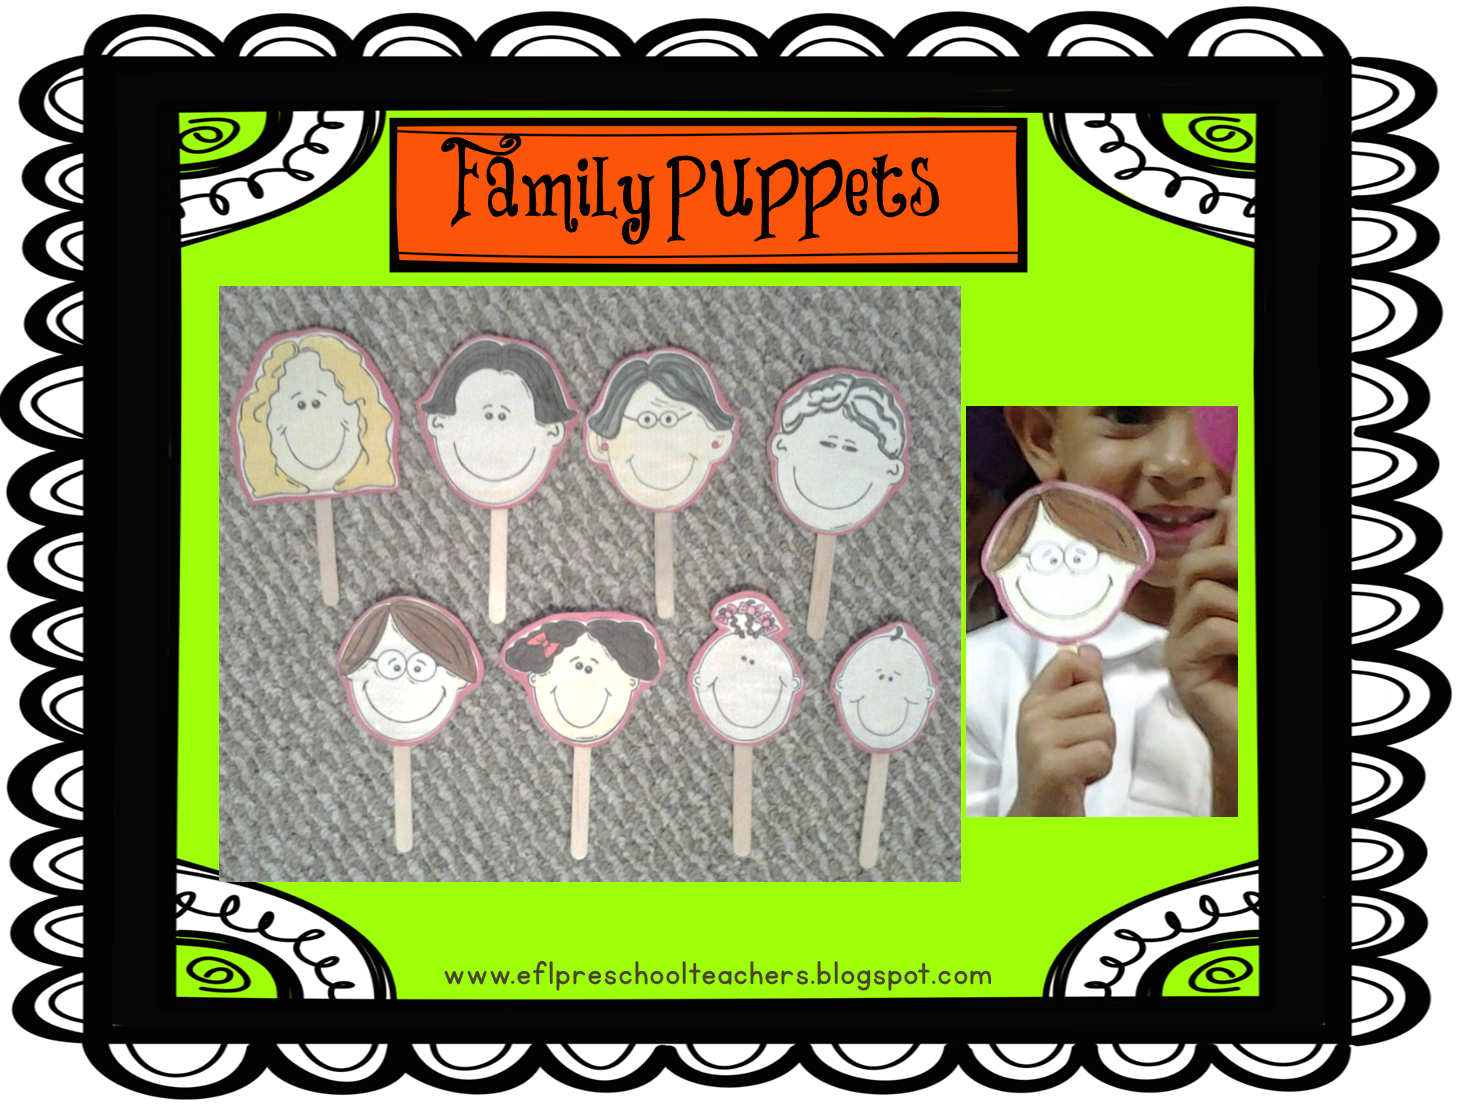 Dictionary clipart educational. Esl family stick puppets